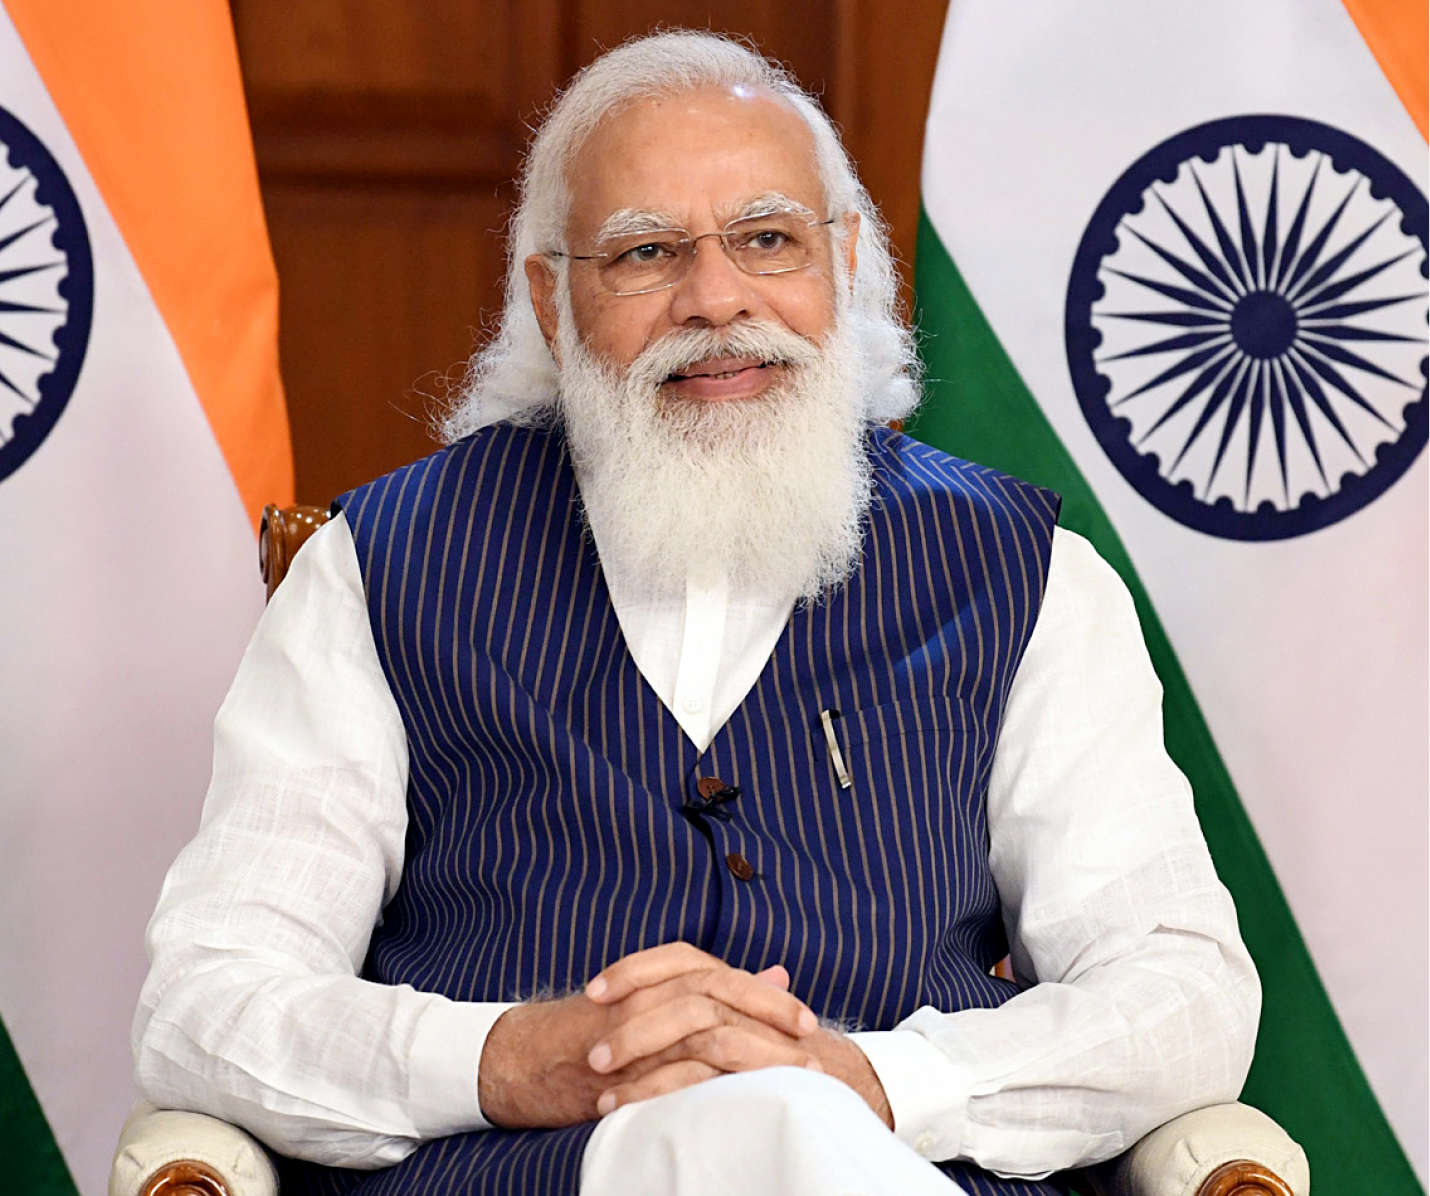 PRIME MINISTER MODI OUTLINES THE MARITIME FREEDOM CHARTER